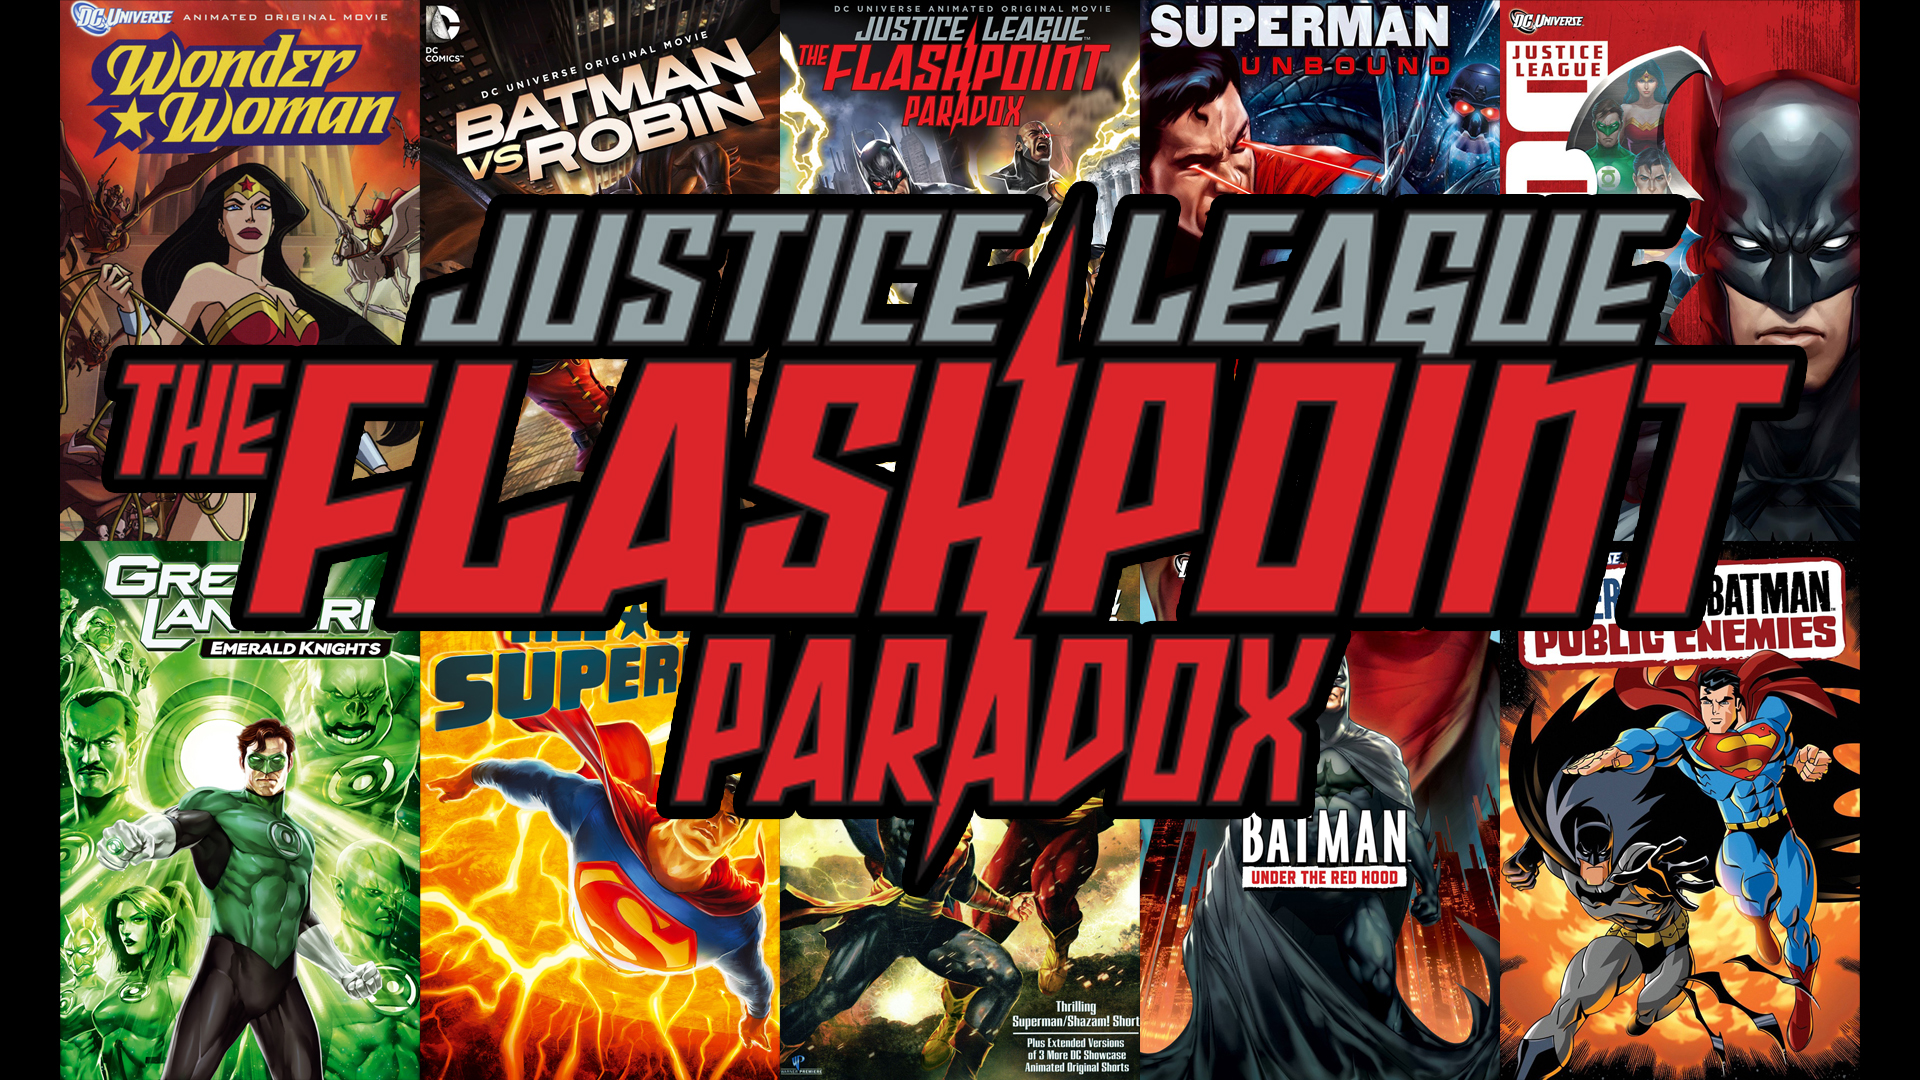 Justice League: The Flashpoint Paradox worth watching? - The Noobist